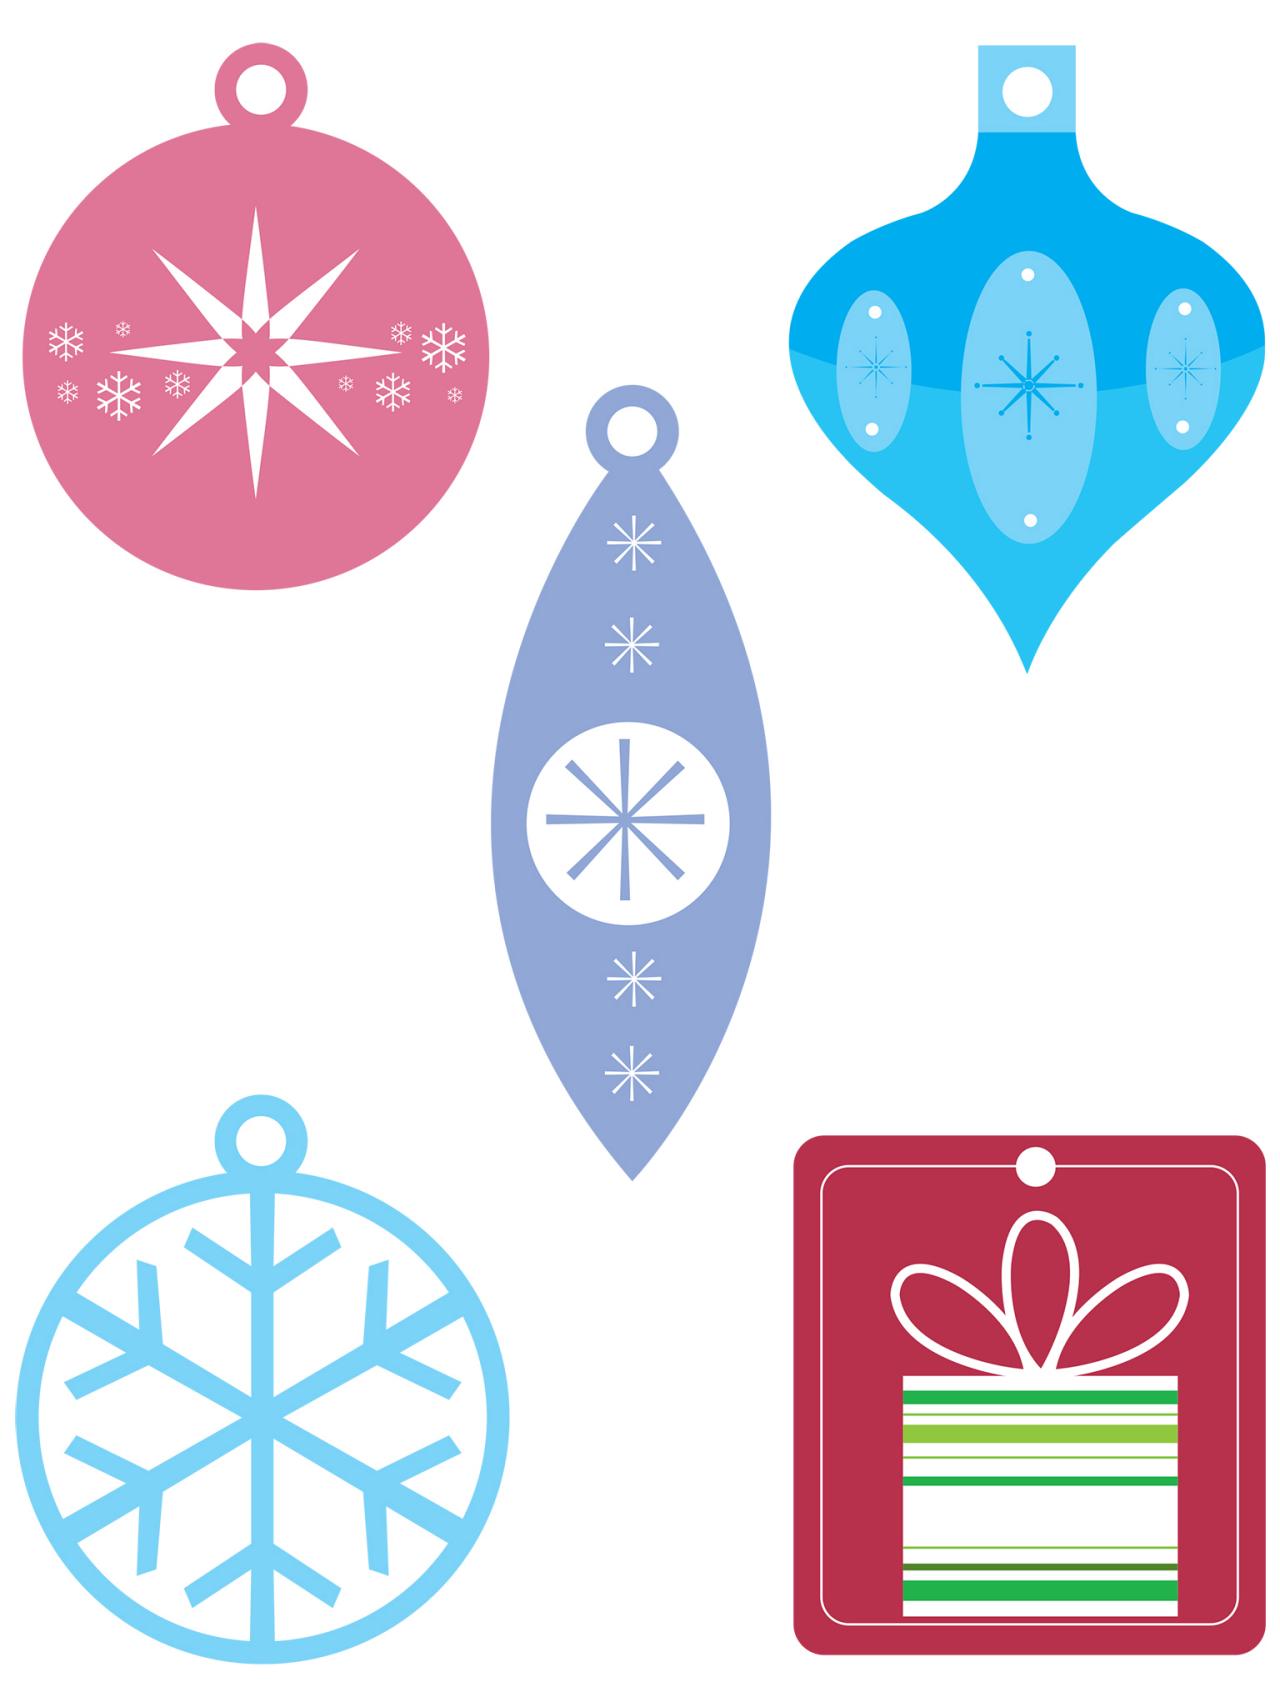 Free Christmas Templates: Printable Gift Tags, Cards, Crafts ...